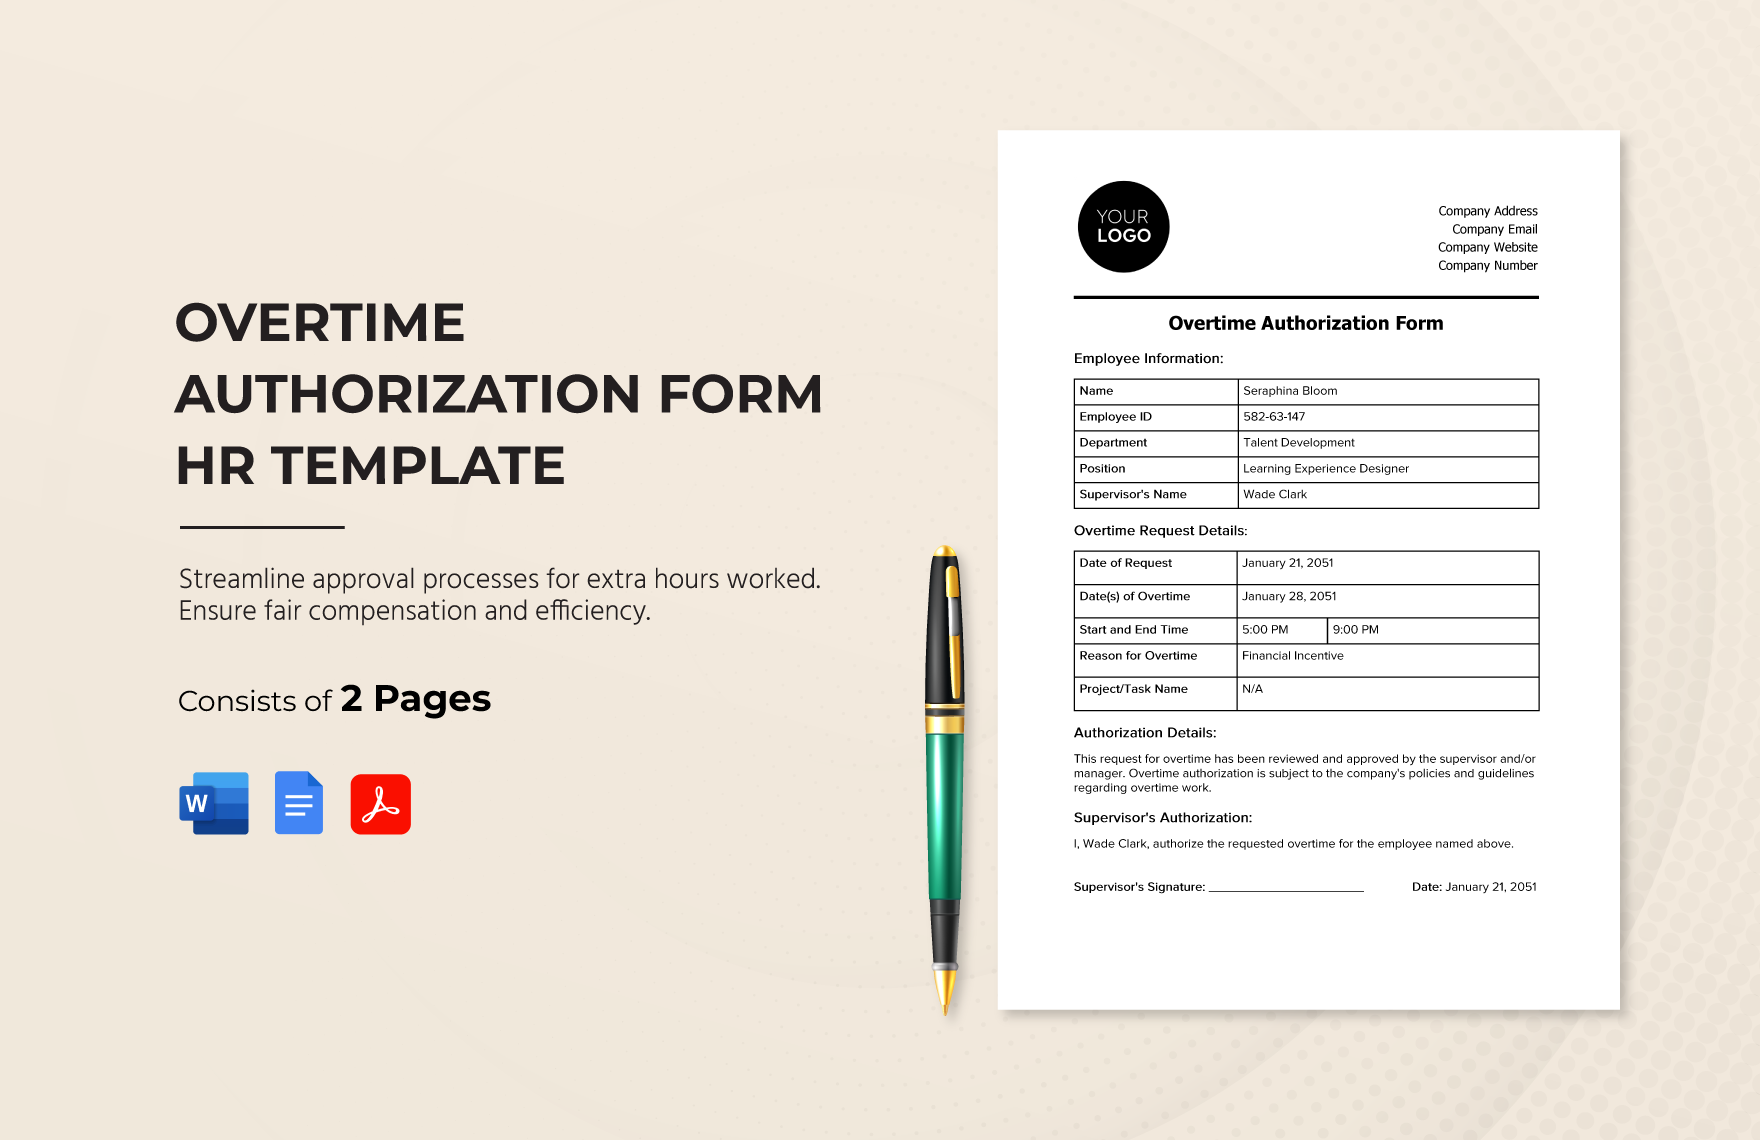 Overtime Authorization Form HR Template